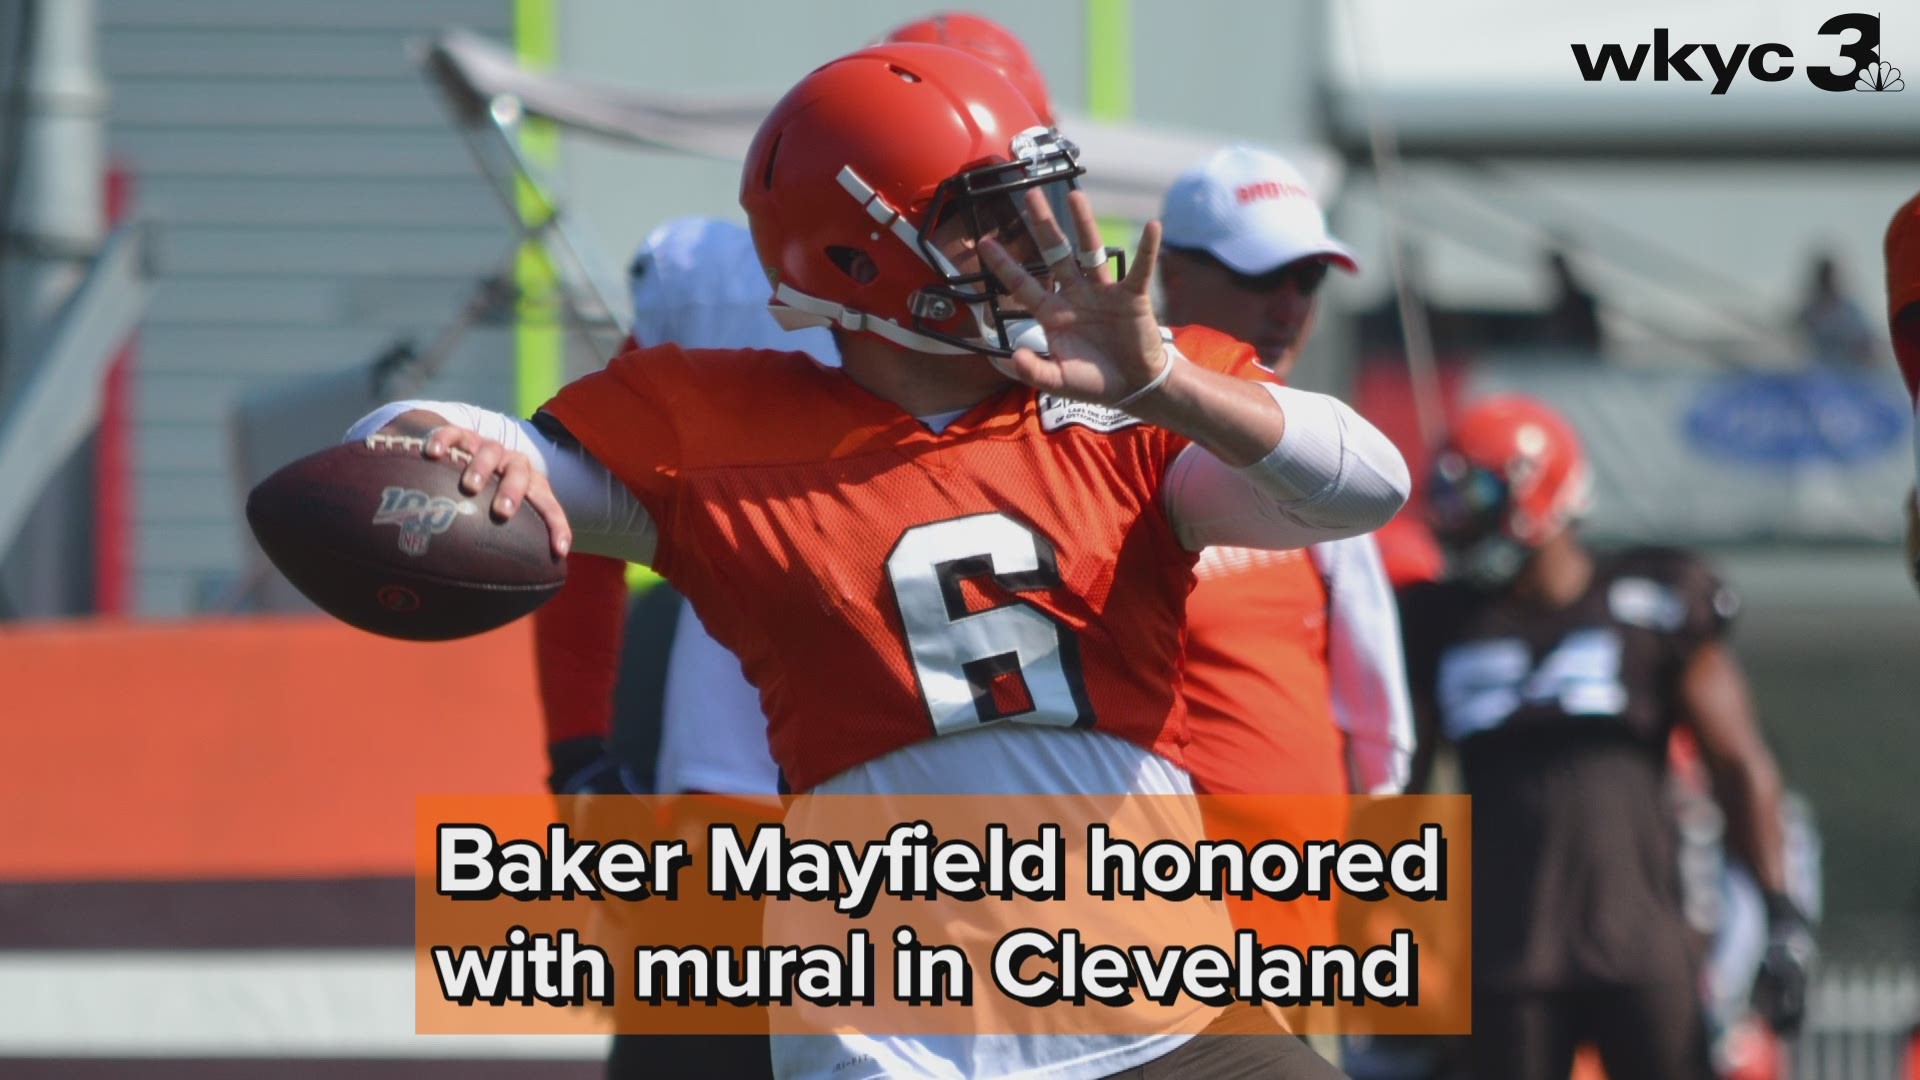 A local artist paid homage the Cleveland Browns quarterback Baker Mayfield on a shipping crate at Voinovich Park.